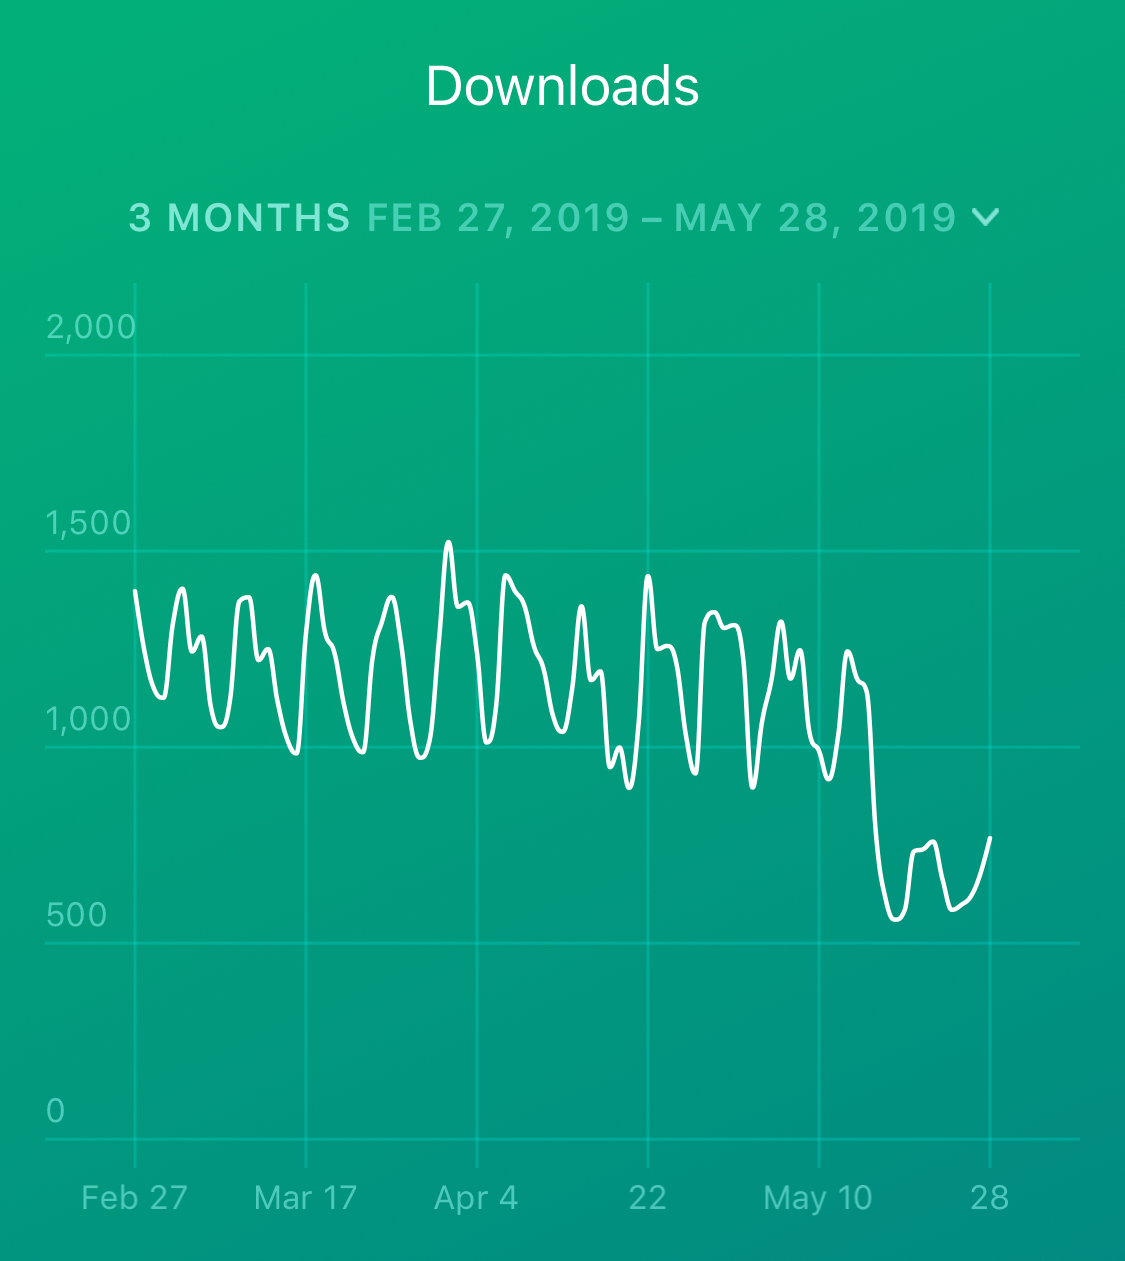 App downloads are still down, a week and a half later.